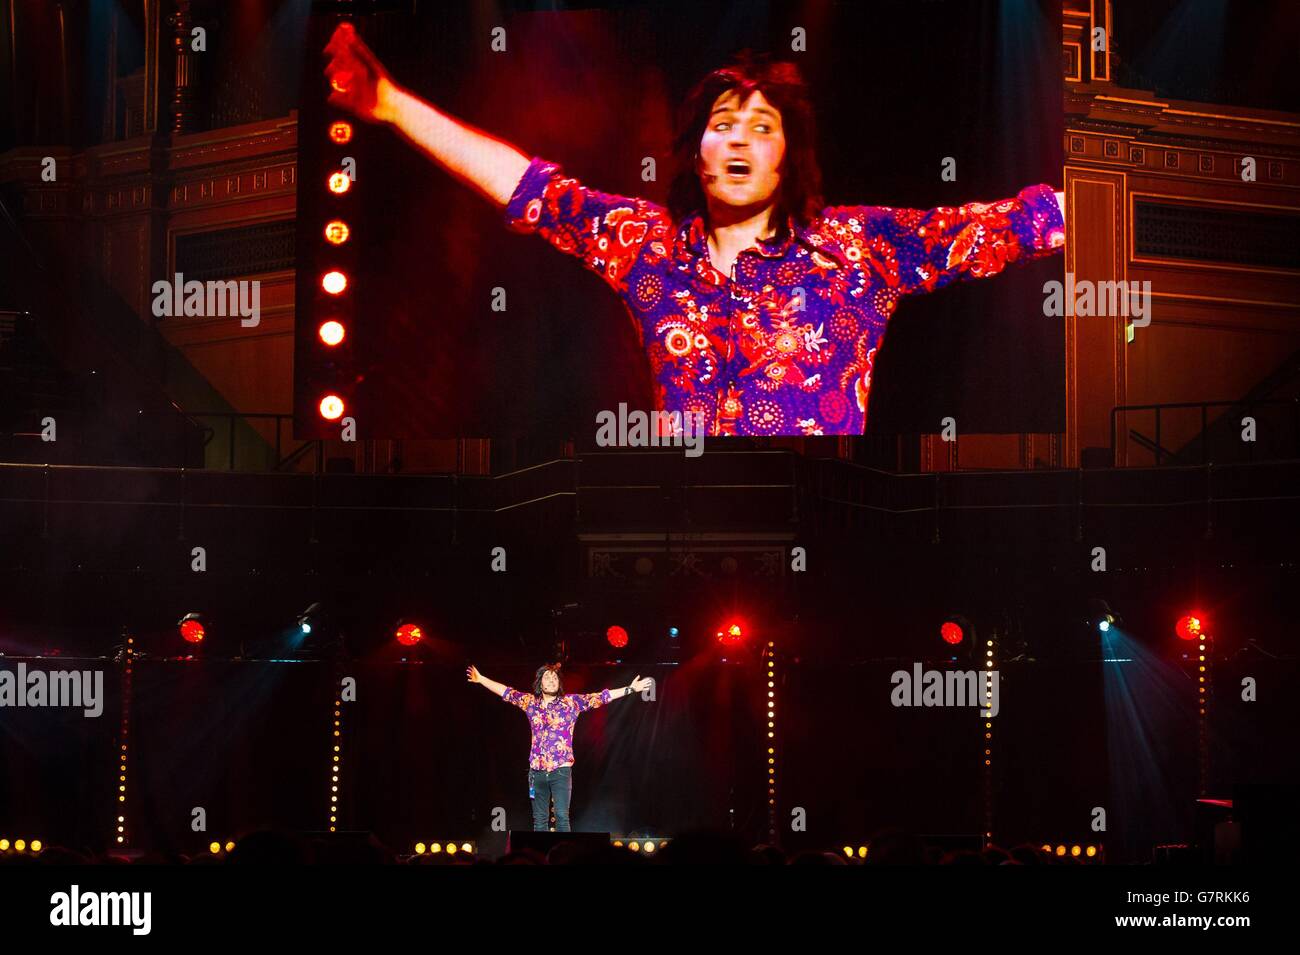 Teenage Cancer Trust concerts 2015 - London. Noel Fielding performs at the Royal Albert Hall, London, in aid of the Teenage Cancer Trust. Stock Photo